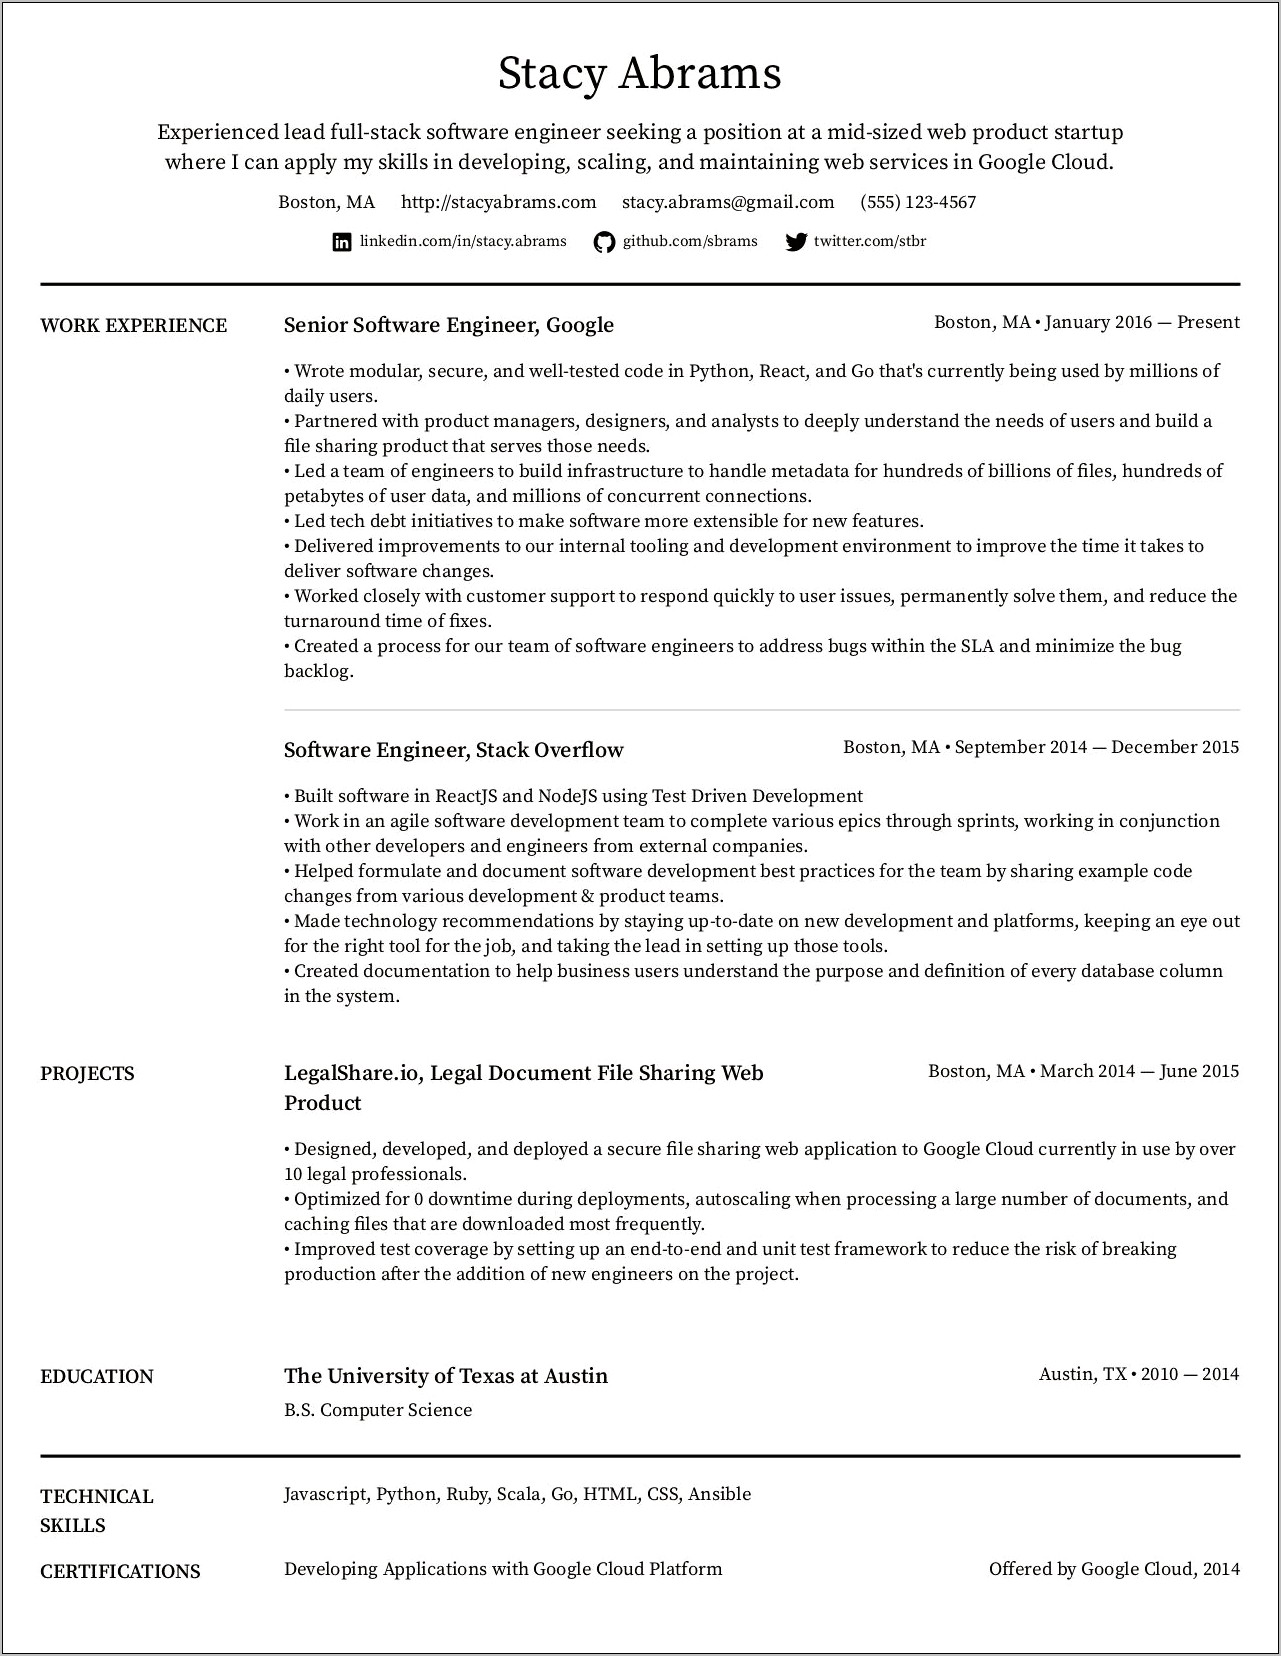 Soltions Manager Resume In Non Tech Company Specify